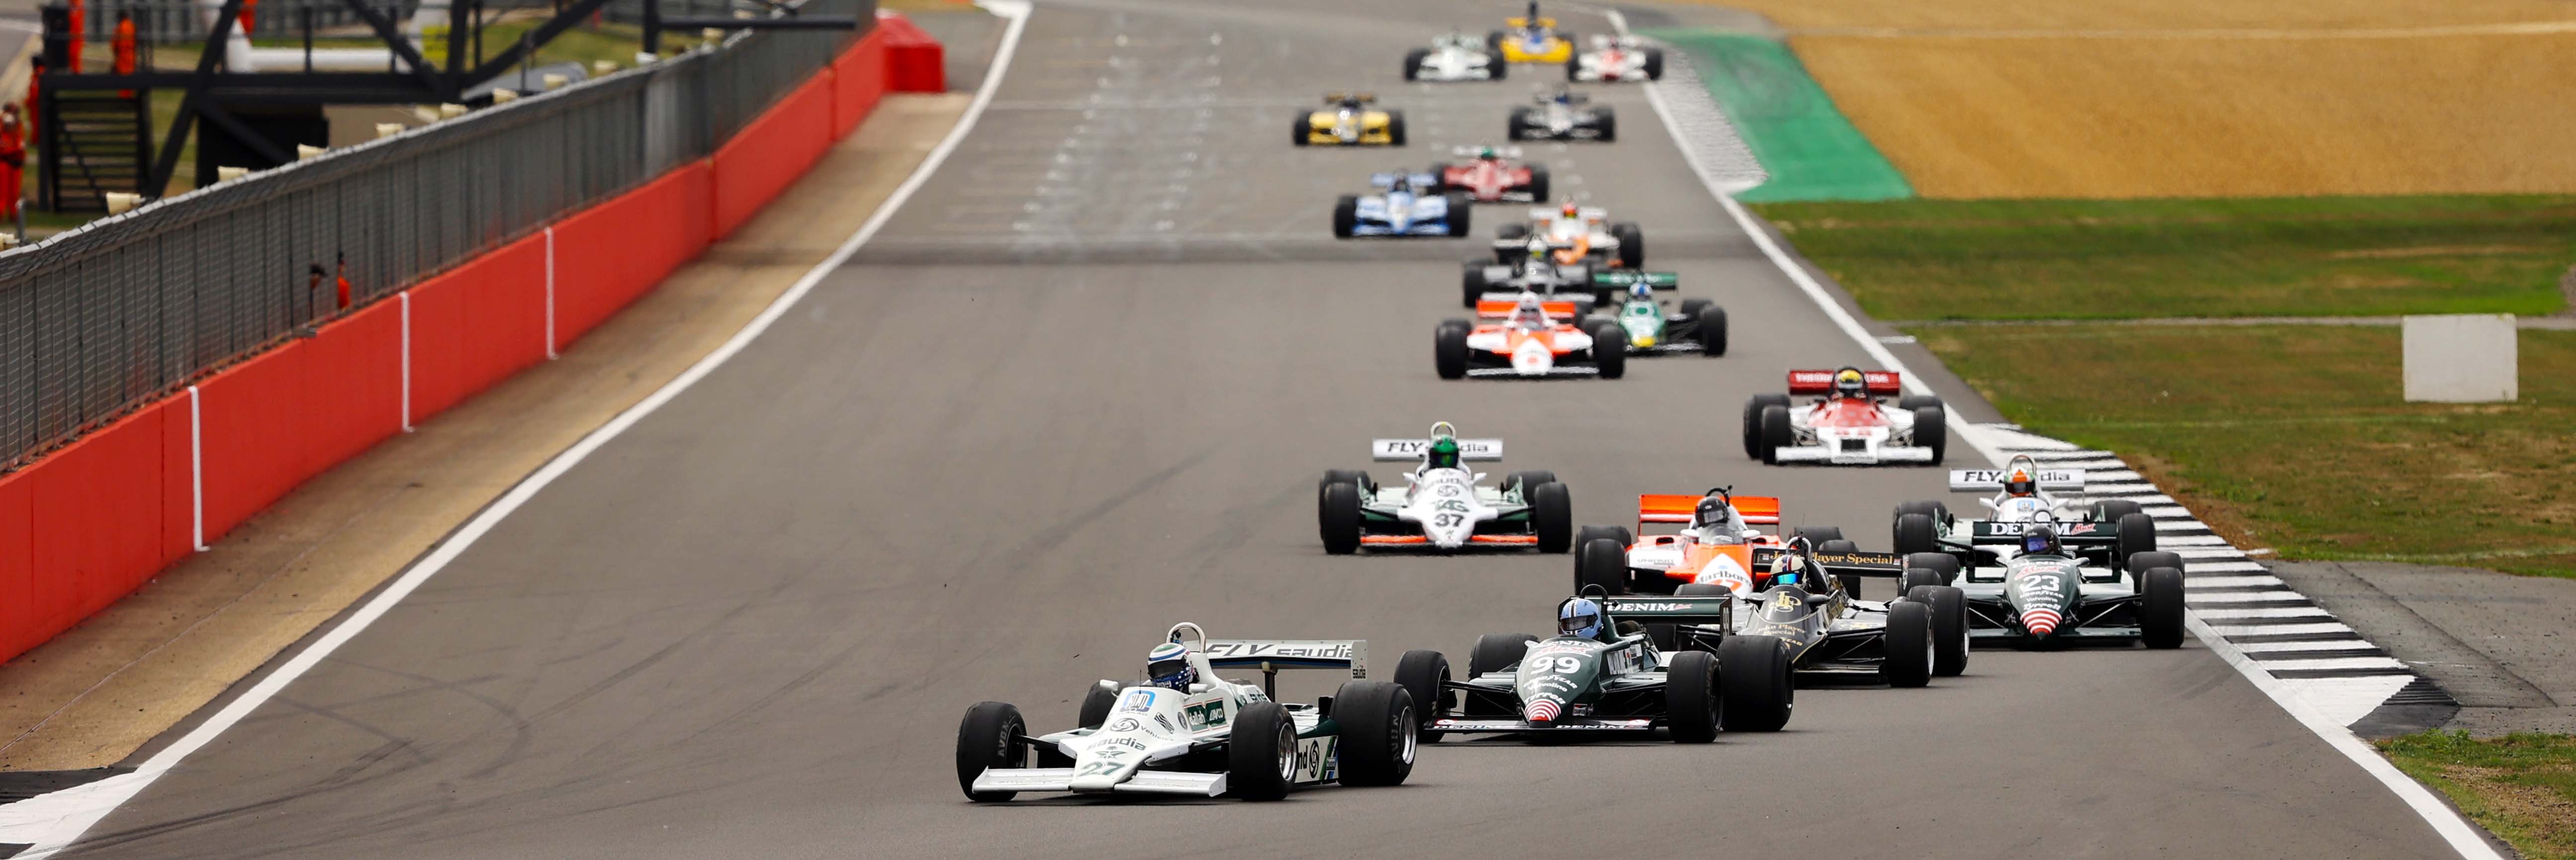 Classic F1 cars at the Silverstone Festival